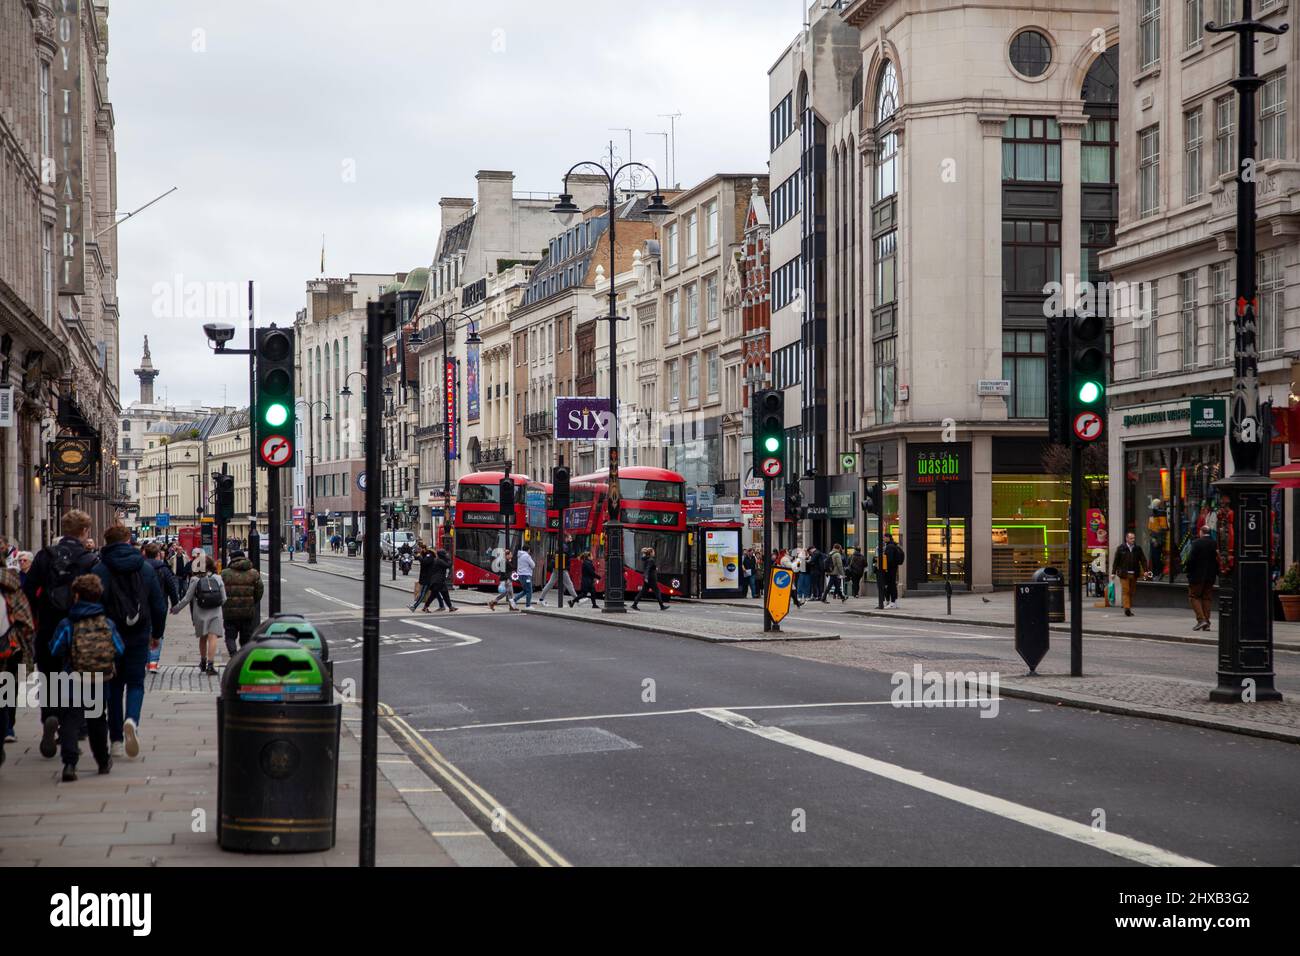 Looking down The Strand in London, UK Stock Photo